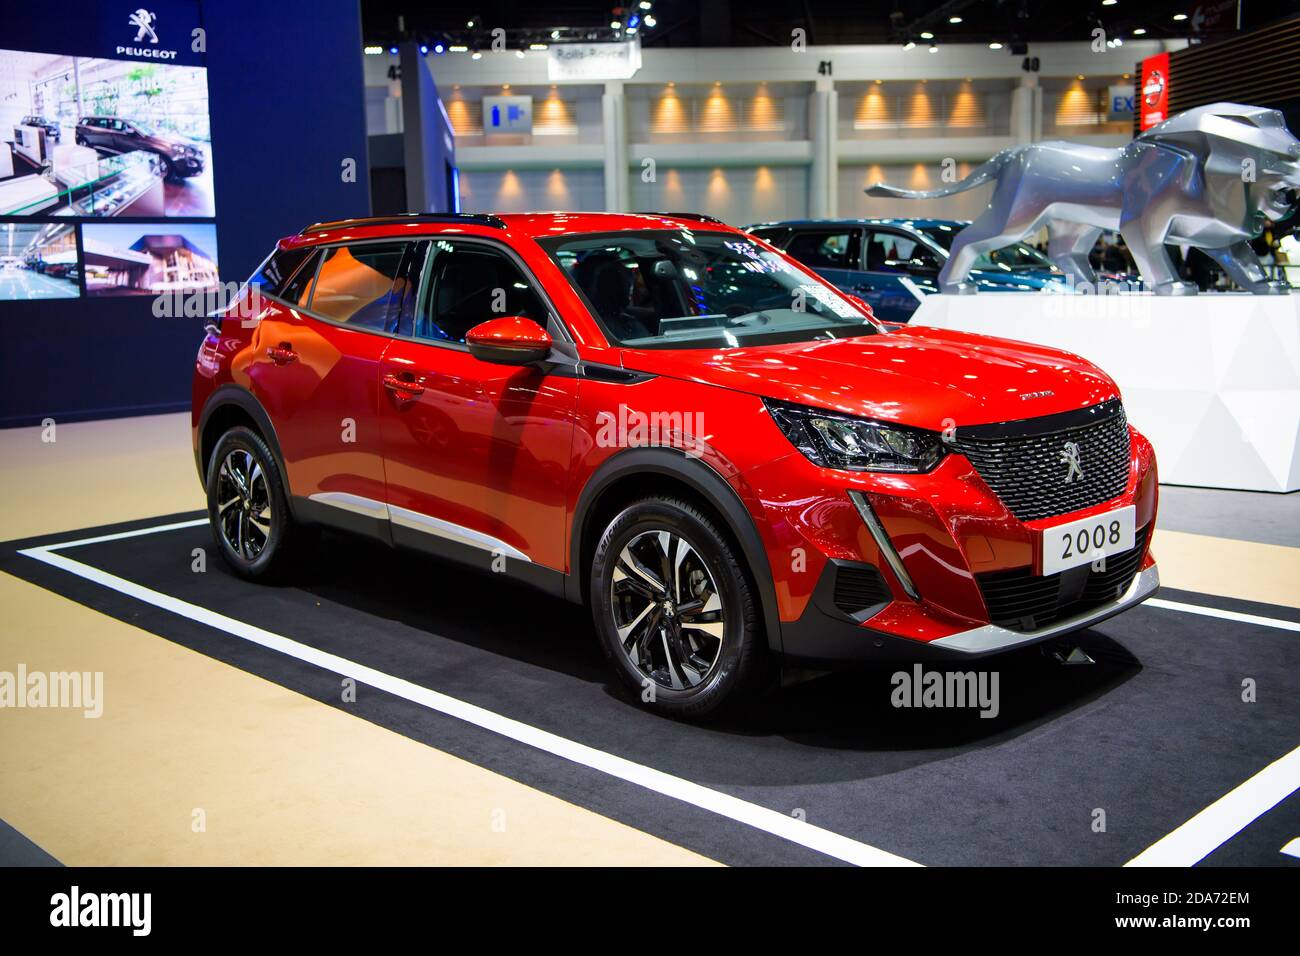 All NEW Peugeot 2008 car on display at THE 41st BANGKOK INTERNATIONAL MOTOR SHOW 2020 on July 14, 2020 in Nonthaburi, Thailand. Stock Photo